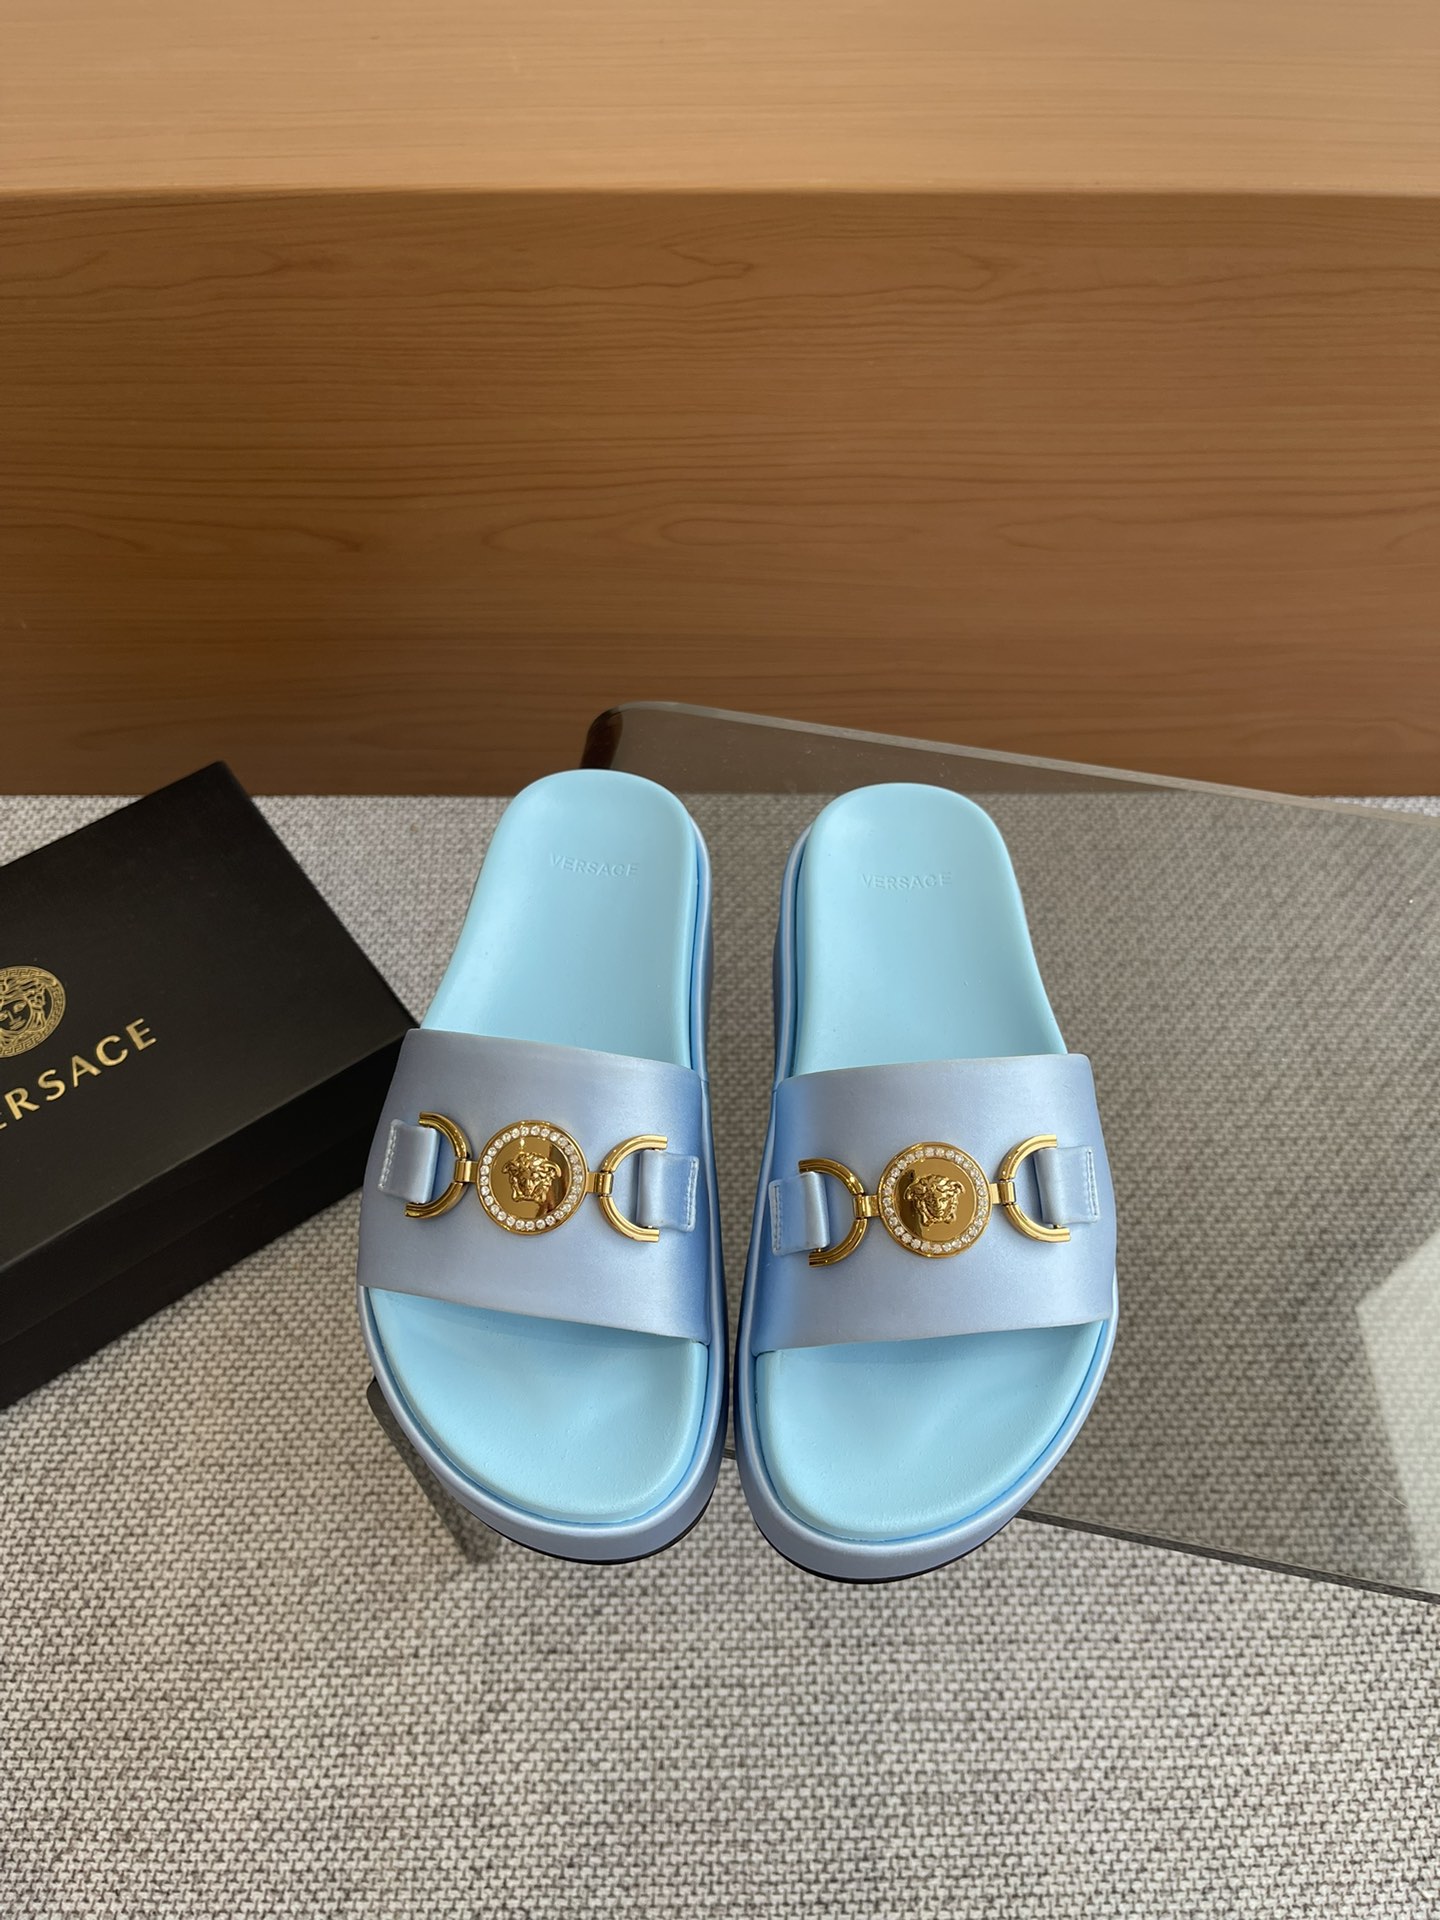 Versace Store
 Shoes Slippers Genuine Leather Sheepskin Silk